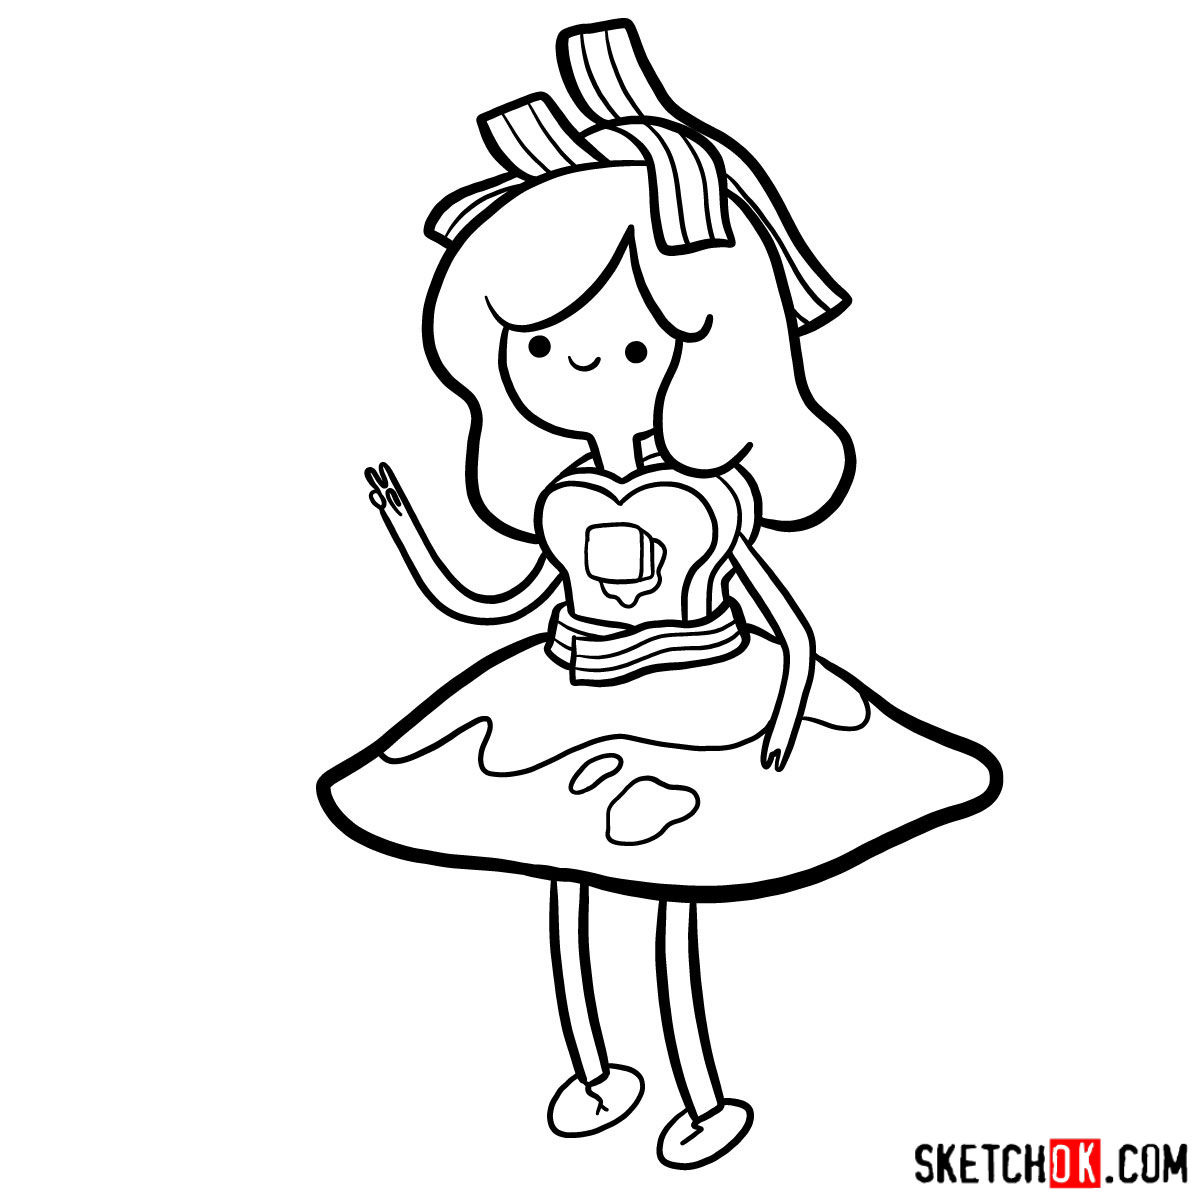 How to draw Breakfast Princess from Adventure Time - step 13